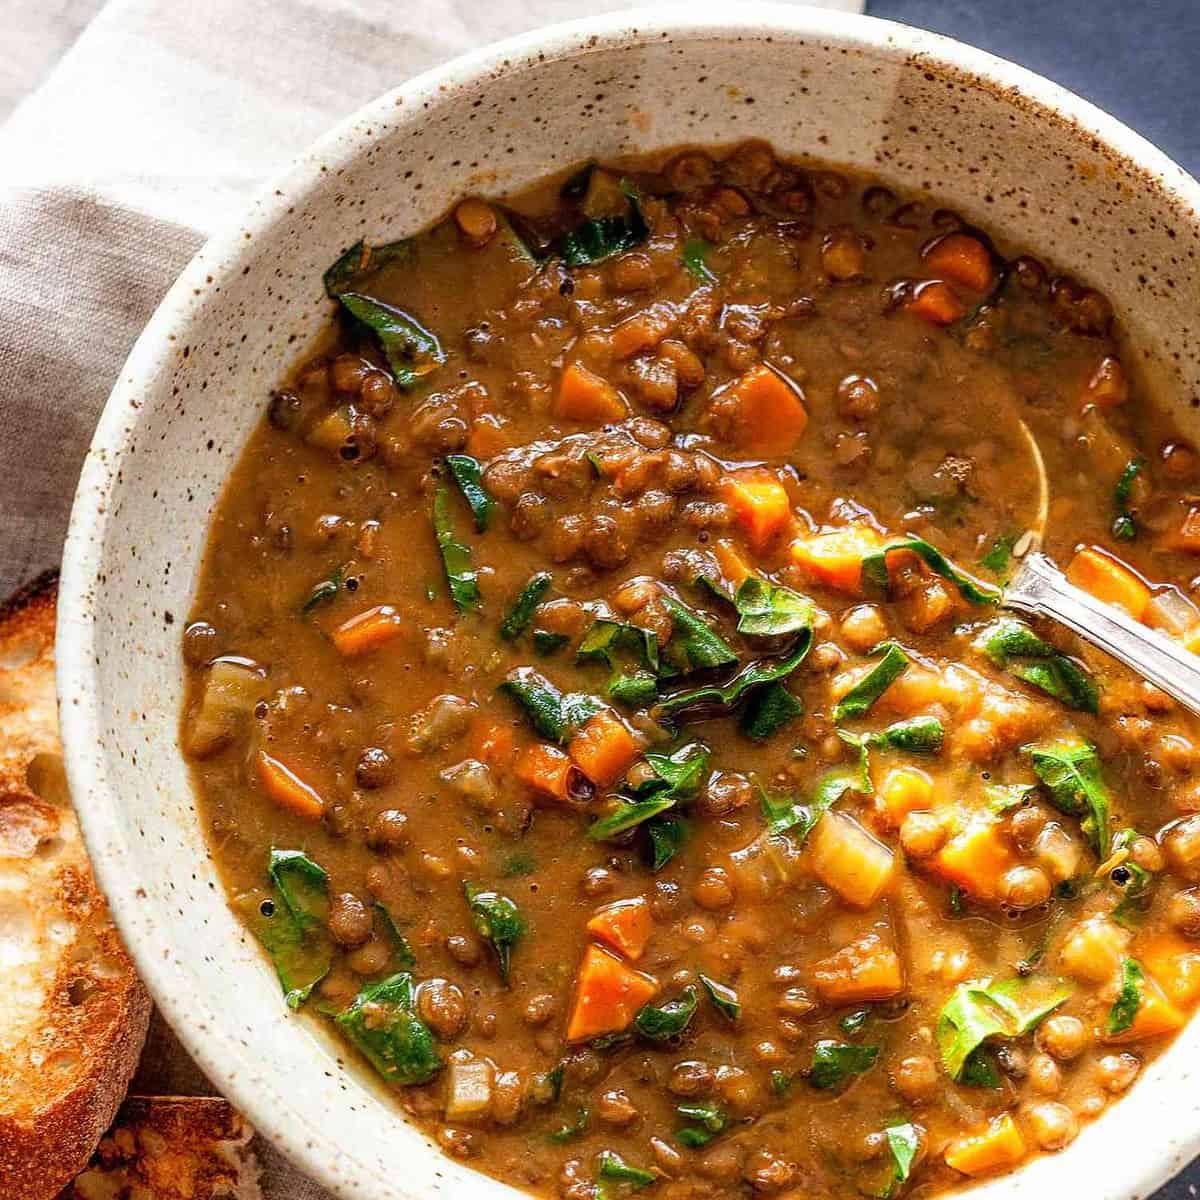  Lentils are a nutritious and delicious addition to any meal.